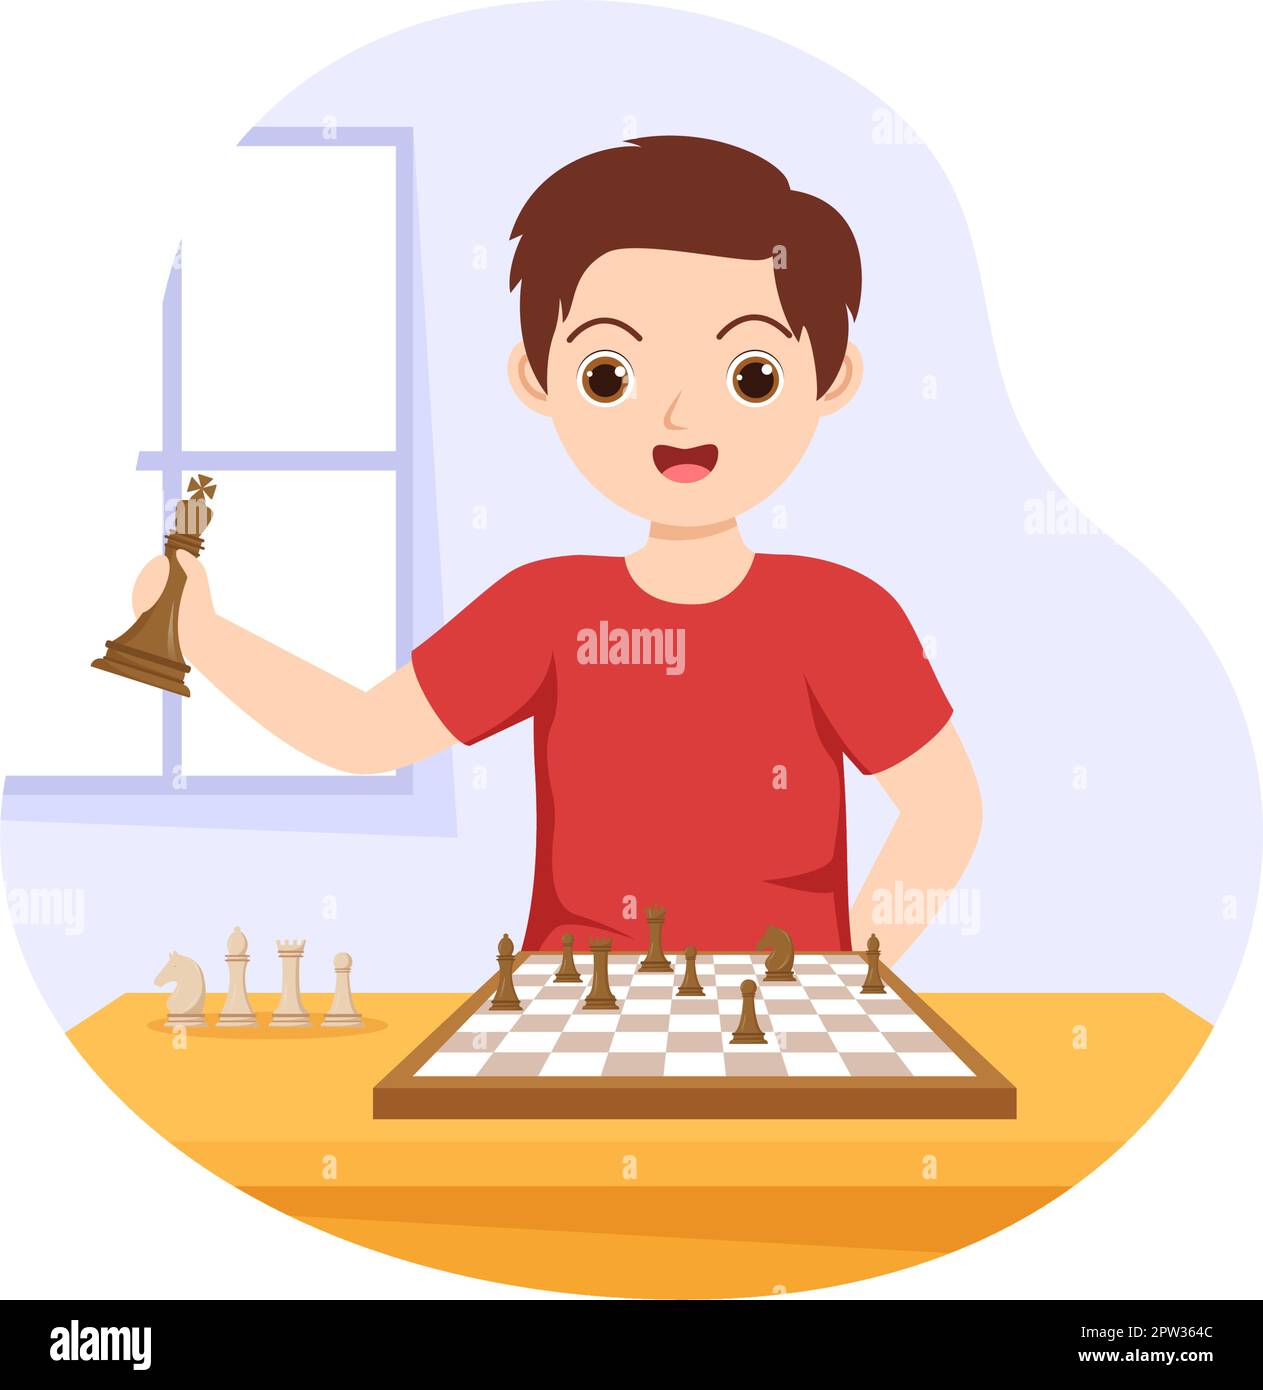 King. Chess Figure. the Game. Chess Tournament. Logic Game. Cartoon Style  Stock Vector - Illustration of hobby, strategy: 216928841